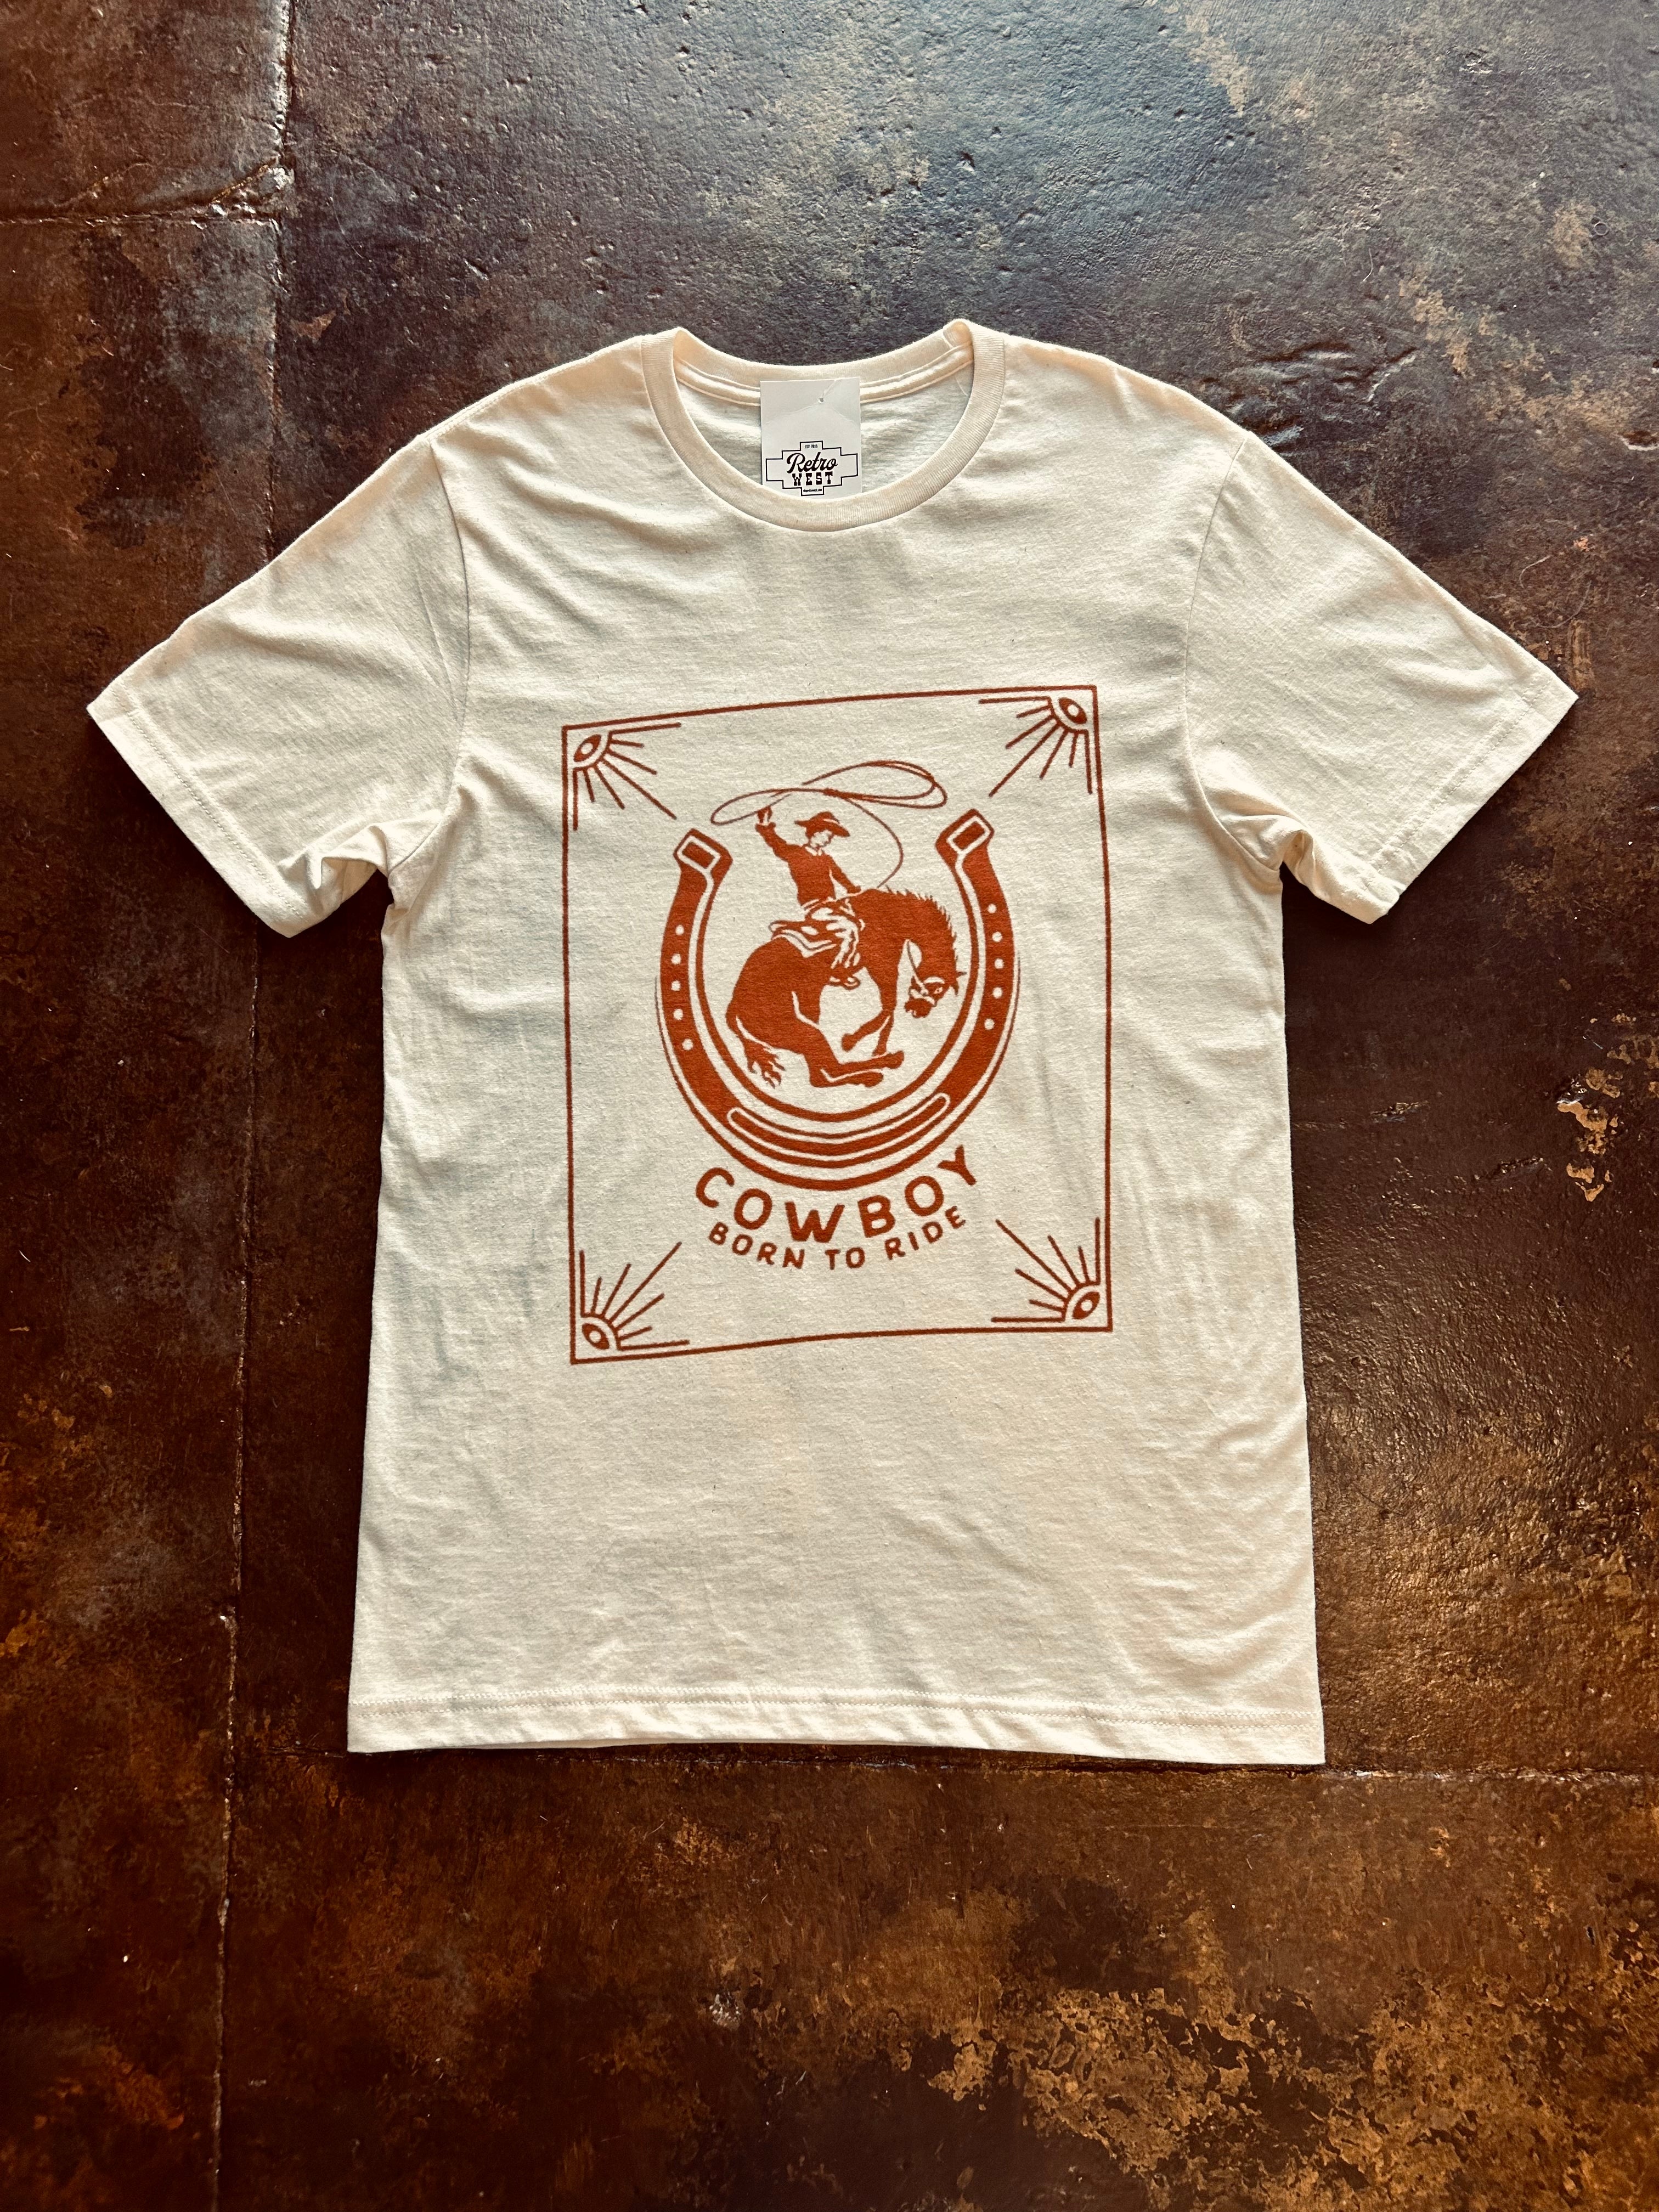 The Born To Ride Tee